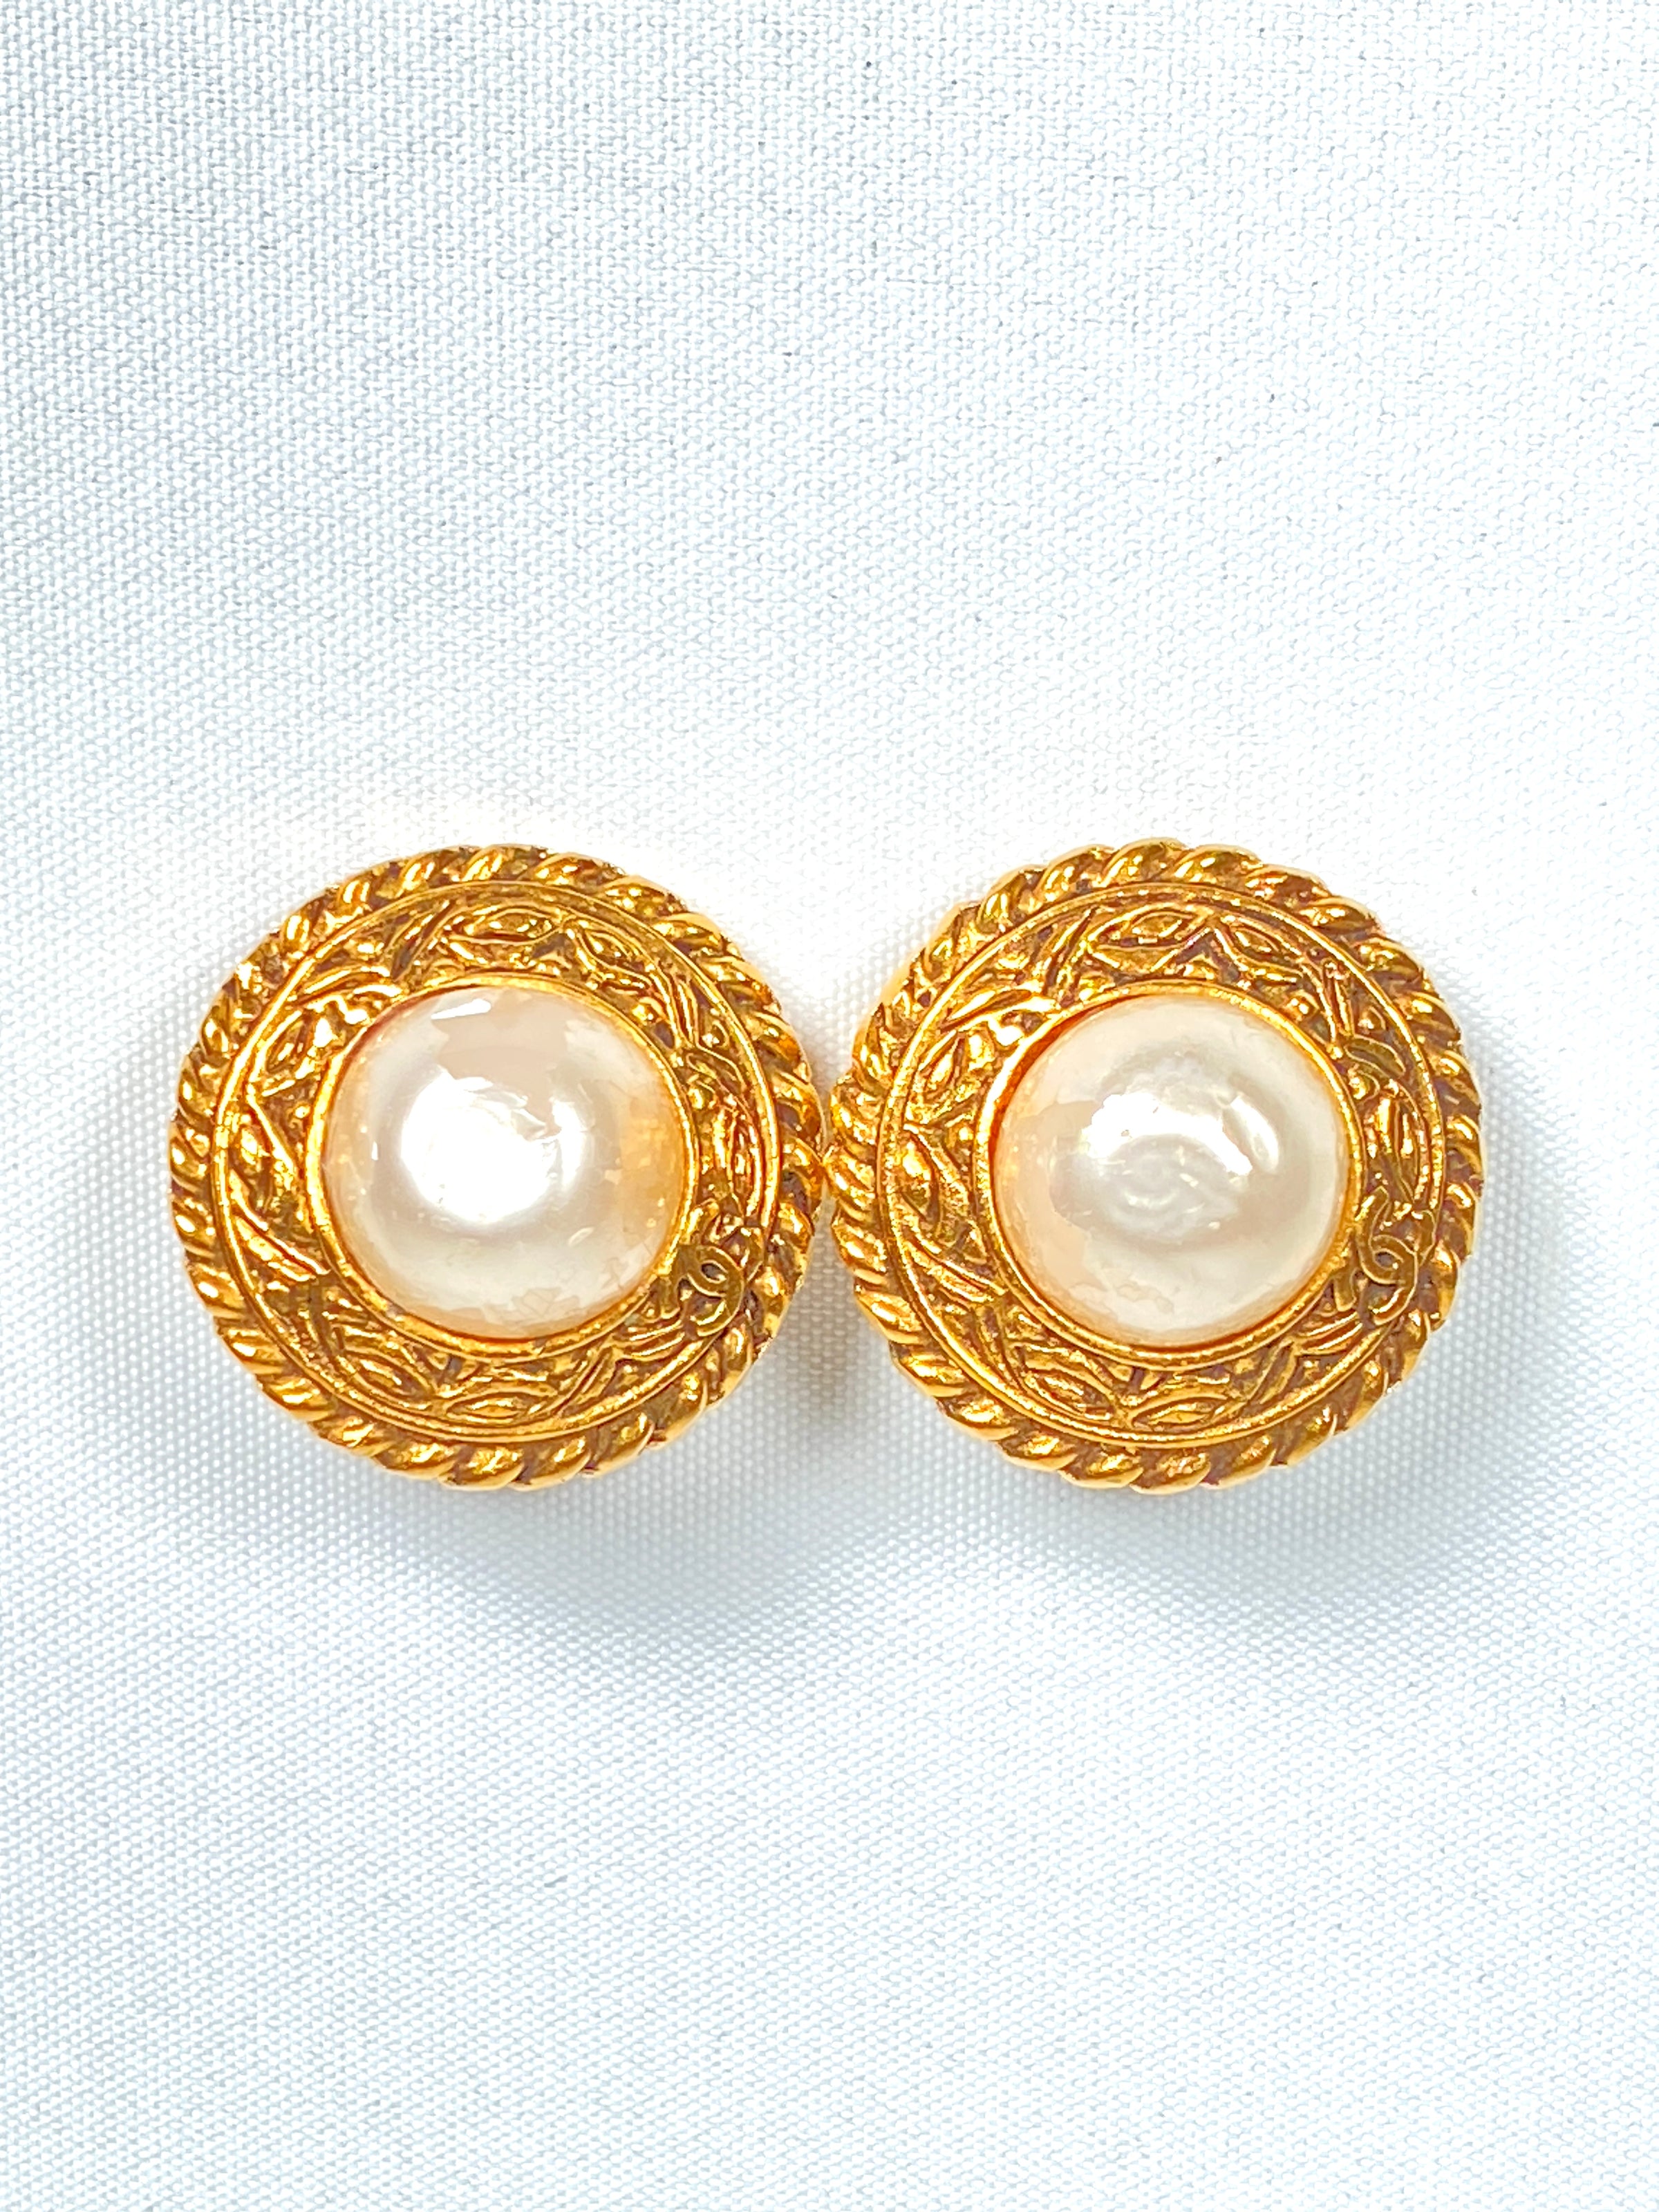 CHANEL - FAUX PEARL AND GOLD ROUND CLIP ON EARRINGS